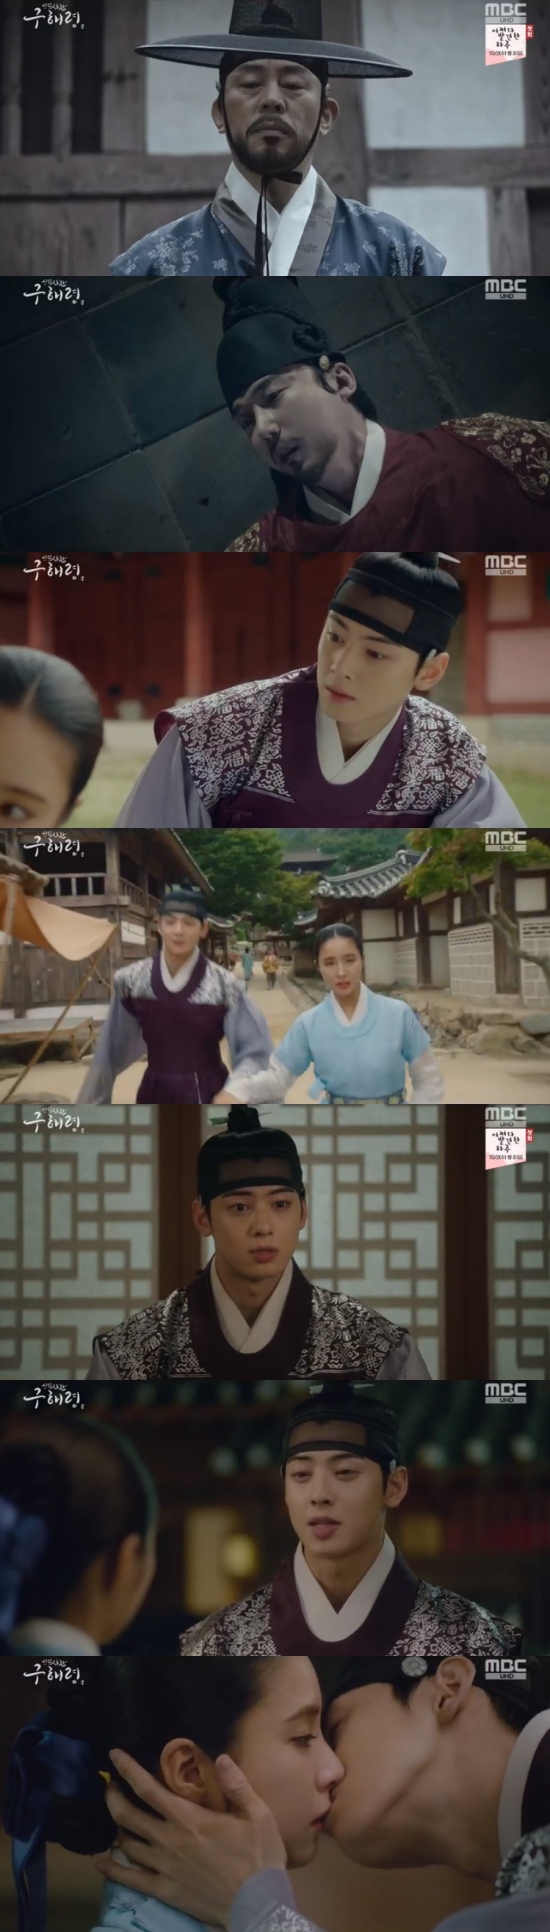 Newcomer Rookie Historian Goo Hae-ryung Cha Eun-woo and Shin Se-kyung revealed the truth about the death of Yoon Jong-hoon and corrected the past.In the 39th and 40th MBC drama The New Entrepreneur Rookie Historian Goo Hae-ryung broadcasted on the 26th, Lee Lim (Cha Eun-woo) was shown to reveal the truth about Lees death 20 years ago and correct the past.It was revealed that Min-ik-pyeong manipulated the letter and killed Lee.In the past, Min-pyeong ordered a young man to correct his letter, and a young man followed the words of Min-pyeong in order to save his colleagues.Min Ik-pyeong wrote a letter written by a young man,Lee Jin also dissuaded Irim, who asked him to open the Chukguk office, and closed the melted sugar.Rookie Historian Goo Hae-ryung fled with Irim trapped in the meltstone, and a mother-of-pearl (Jeon Ik-ryeong) was waiting for the two.Irim talked to Mohwa and asked about his mother.Furthermore, Irim said, What happens to me after tomorrow. Do not move because you do not know.Even if I leave, I have to have a place to write, said Rookie Historian Goo Hae-ryung. You do not have to do that.Wherever Mama is, Ill be with her. Now youve met people who are out of the palace.I can not live like that without being alone again and resting comfortably. I will be with Mama. But Irim said, No. You live your life. I saw you standing in the yard the day you came out. I wasnt locked in the meltstone.My whole life was a time to wait for you to come to me. So its okay.I can change my name and live here and there, but I can endure it if I think I am waiting for the day I meet you someday. He kissed Rookie Historian Goo Hae-ryung.In particular, Irim told Itae (Kim Min-sang): I am no longer a Dawon, Irim, the son of Yi-Gyeong, who has been able to kill me for the past 20 years.What is the reason you did not. You knew that your objections were wrong.I did not have me, the enemy of the lungs, alive this time because of the guilt that I killed my innocent brother and took Wang Yu Lee Tae said, The officers stop the brush, the officer who does not retreat will be thirsty here. Rookie Historian Goo Hae-ryung stood next to Irim.Rookie Historian Goo Hae-ryung said: Even if you beat me, the essay will not stop.Another officer will come and sit here where I died, and if you kill him, another officer will come and sit down.You can never stop him from killing all the officers of this land and taking all the paper and brushes from his mouth to his pupil to his child.Thats what its going to be said. Thats the power of truth, he said.Other officers also supported Rookie Historian Goo Hae-ryung, and Lee Jin said: True loyalties do not block the eyes and ears of the king; you still dont know.The kings country and the people are left, and the one who harms him is left. Please listen to the orders of the Taoyuan and the officers.If there are those who have been framed, restore your identity and punish those who have sinned.Open the Chukkuk Office and correct all the things that happened in the year of the year. Eventually, the Chukkuk government opened, and after that, Irim visited Daehan Lim (Kim Yeo-jin) and said, I know that it was Mamas long desire to climb Wang YuThat position is not mine. The time spent in the army was a time of enough for me.I want to live as a normal person, not as a son of anyone now. After three years, Rookie Historian Goo Hae-ryung still worked at the precept, and Irim was living a free life.Irim returned to Hanyang in a long time, and immediately headed to the house of Rookie Historian Goo Hae-ryung.Irim and Rookie Historian Goo Hae-ryung expressed their affection for each other frankly, and spent the night together.Photo = MBC Broadcasting Screen